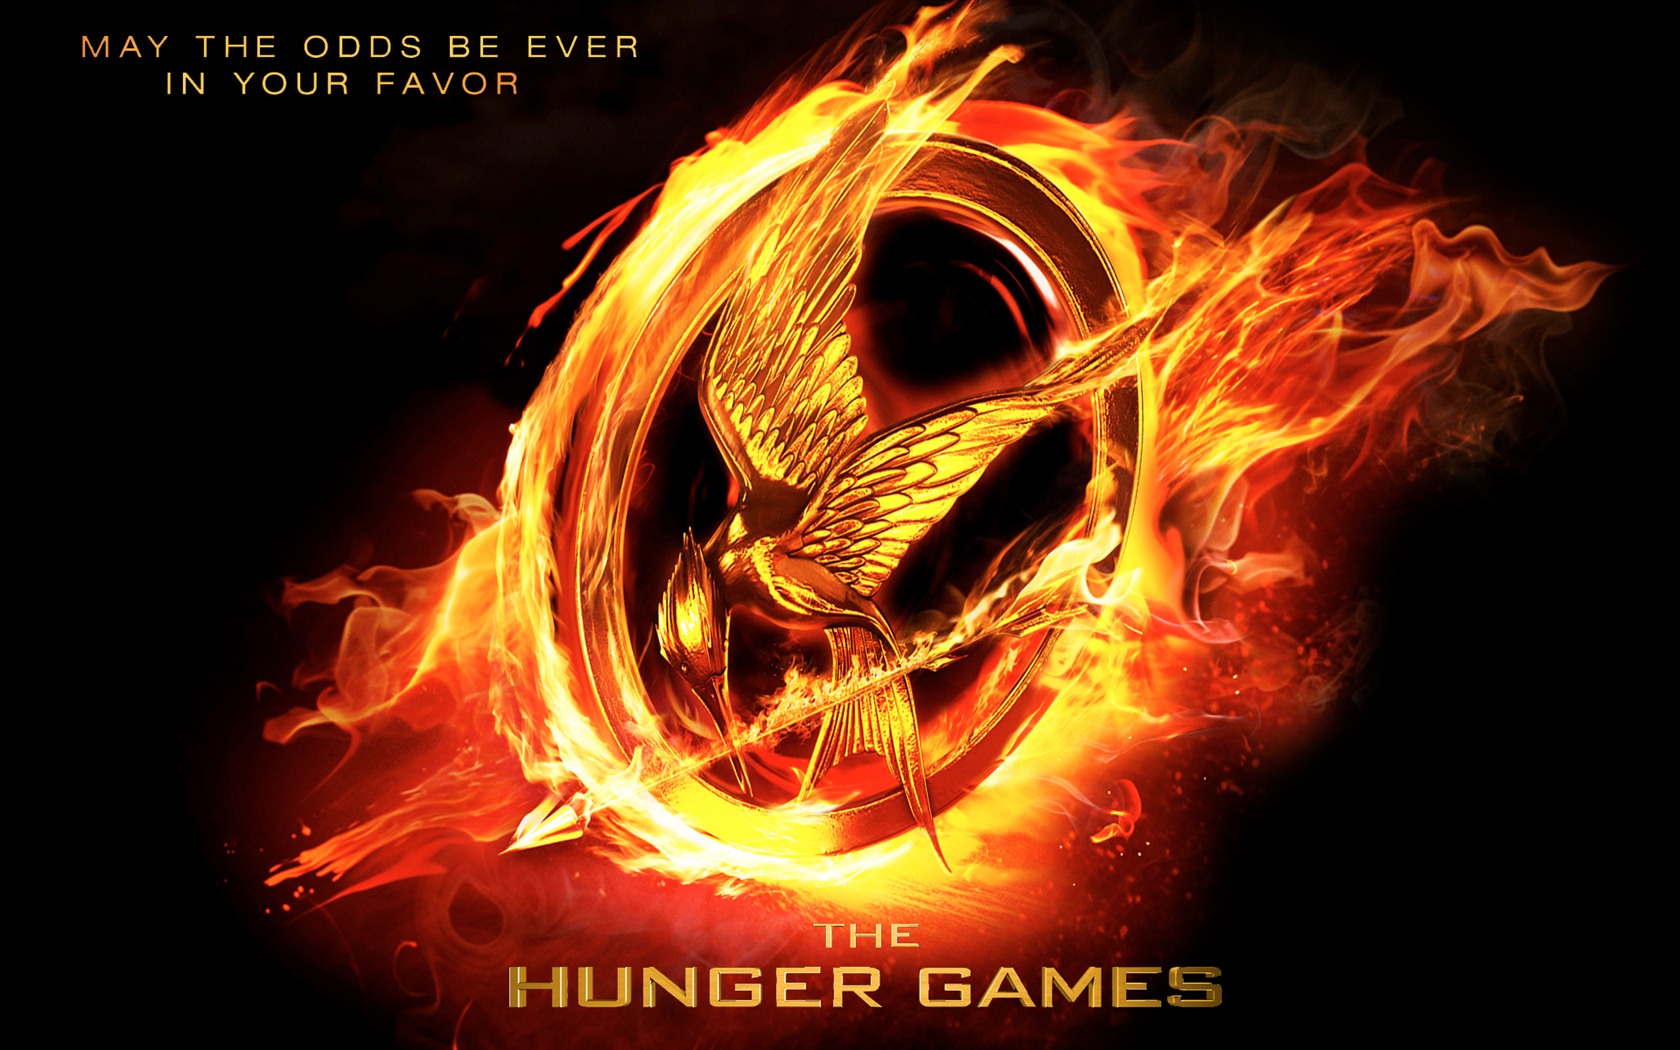 The Hunger Games HD wallpapers #13 - 1680x1050